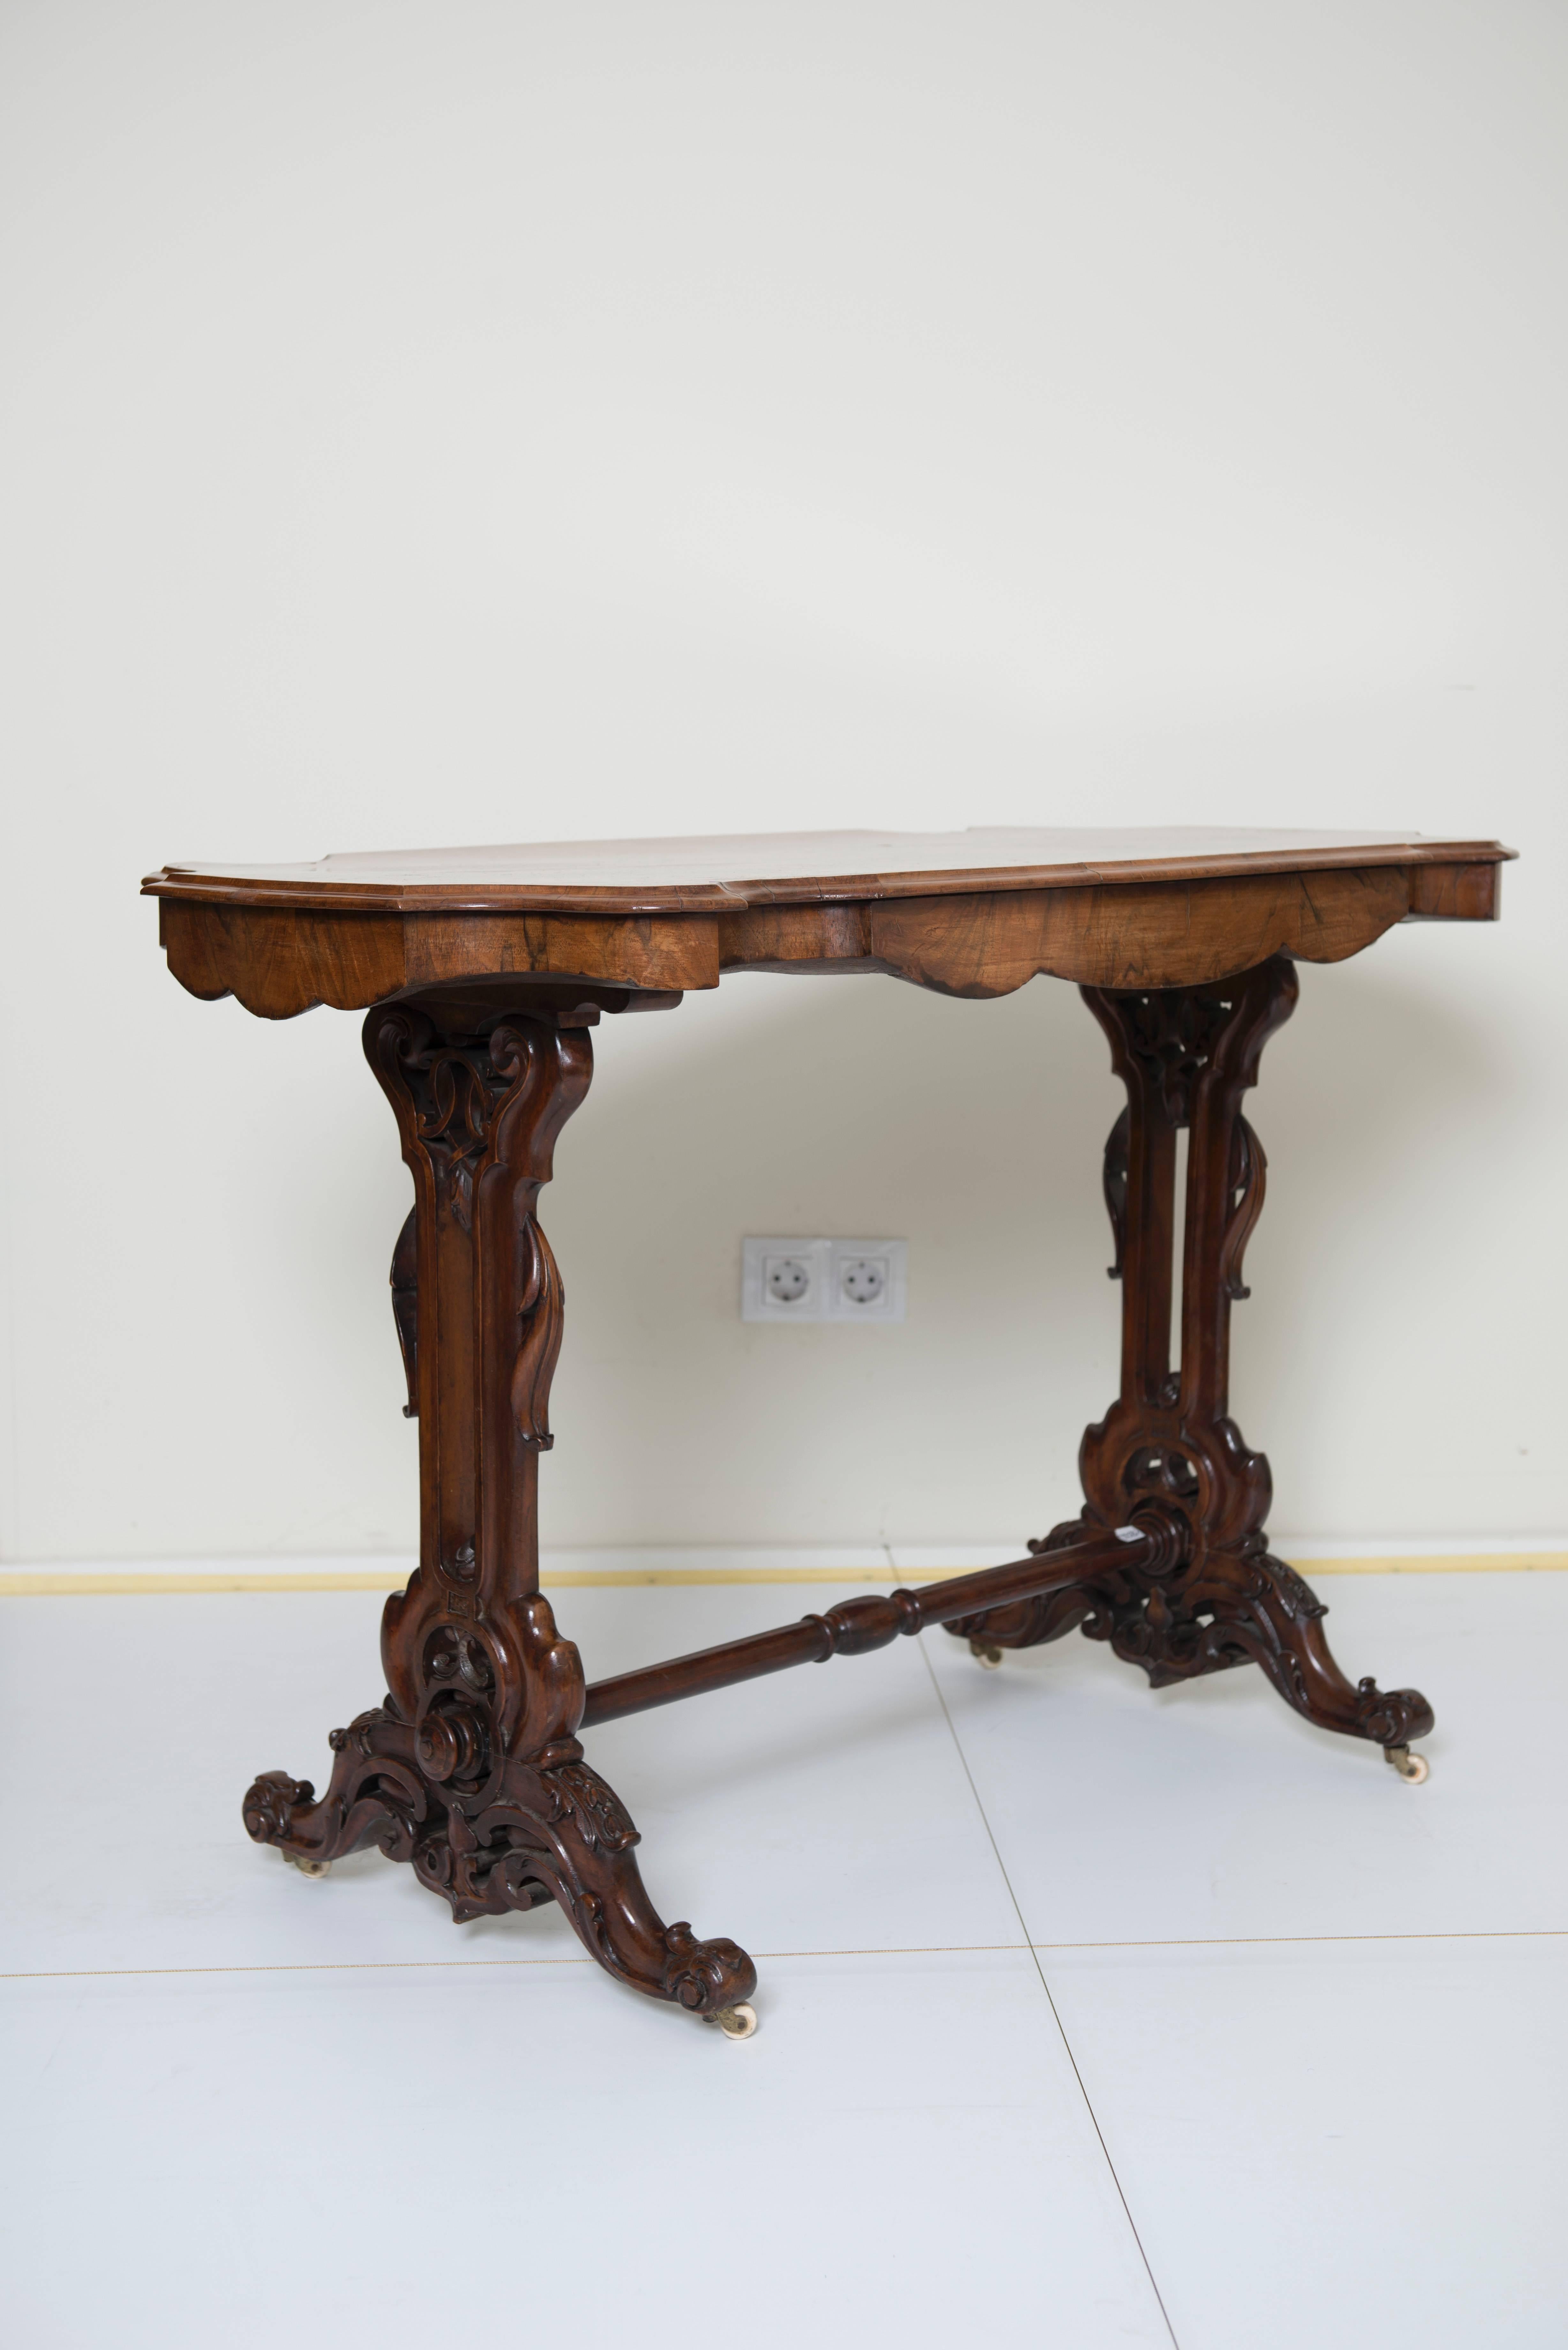 Fine quality early Victorian rosewood burr card table or console table.
Measures: 72 H/107/59.